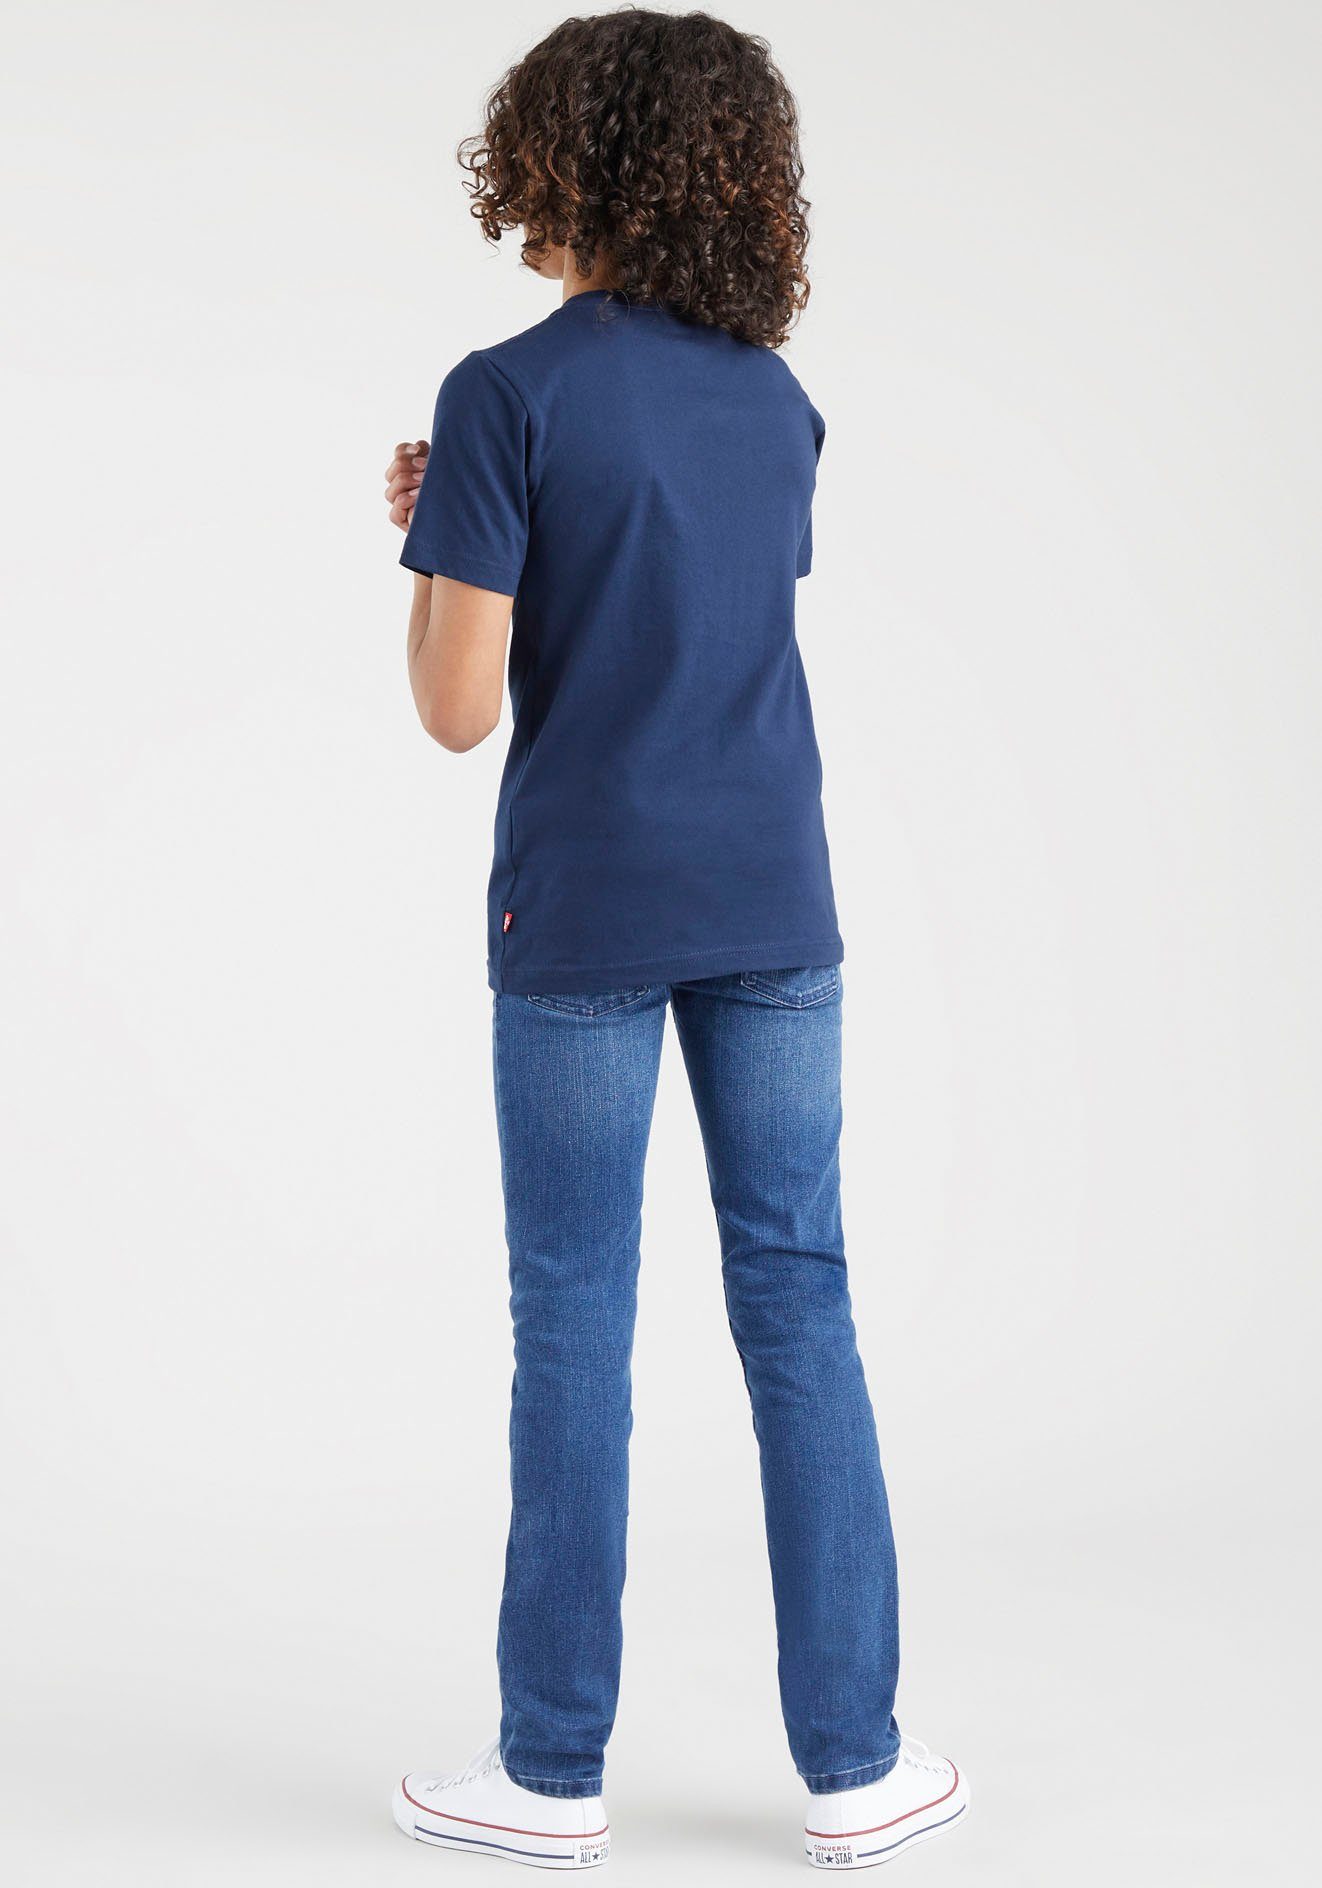 CHEST BATWING HIT BOYS Kids for navy T-Shirt Levi's®